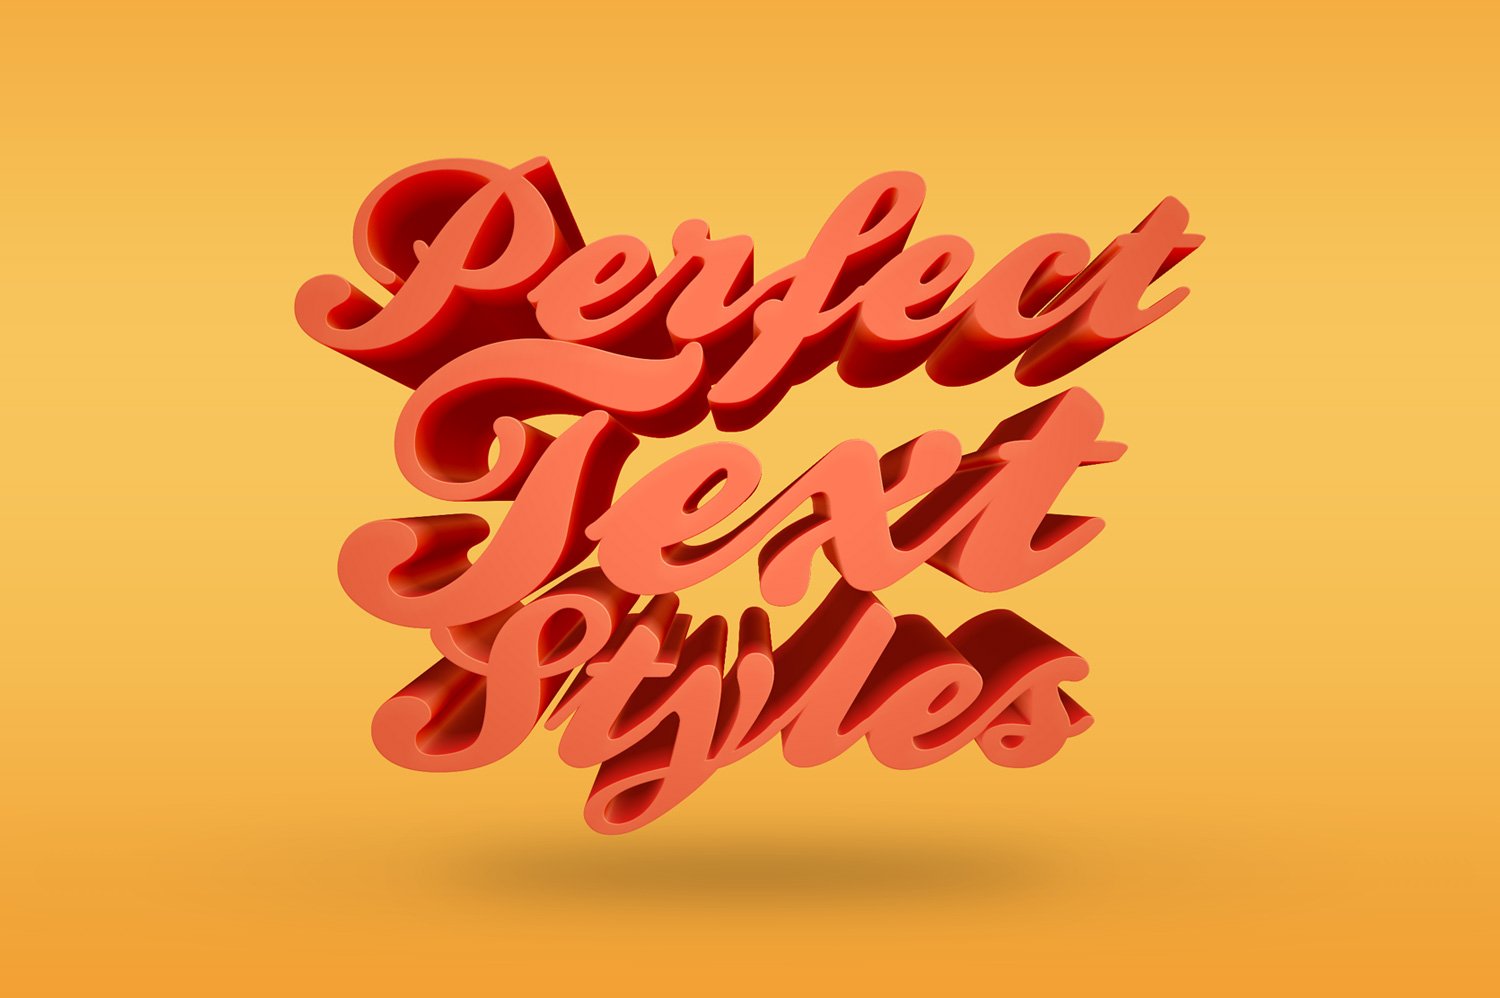 3D Text Effectscover image.